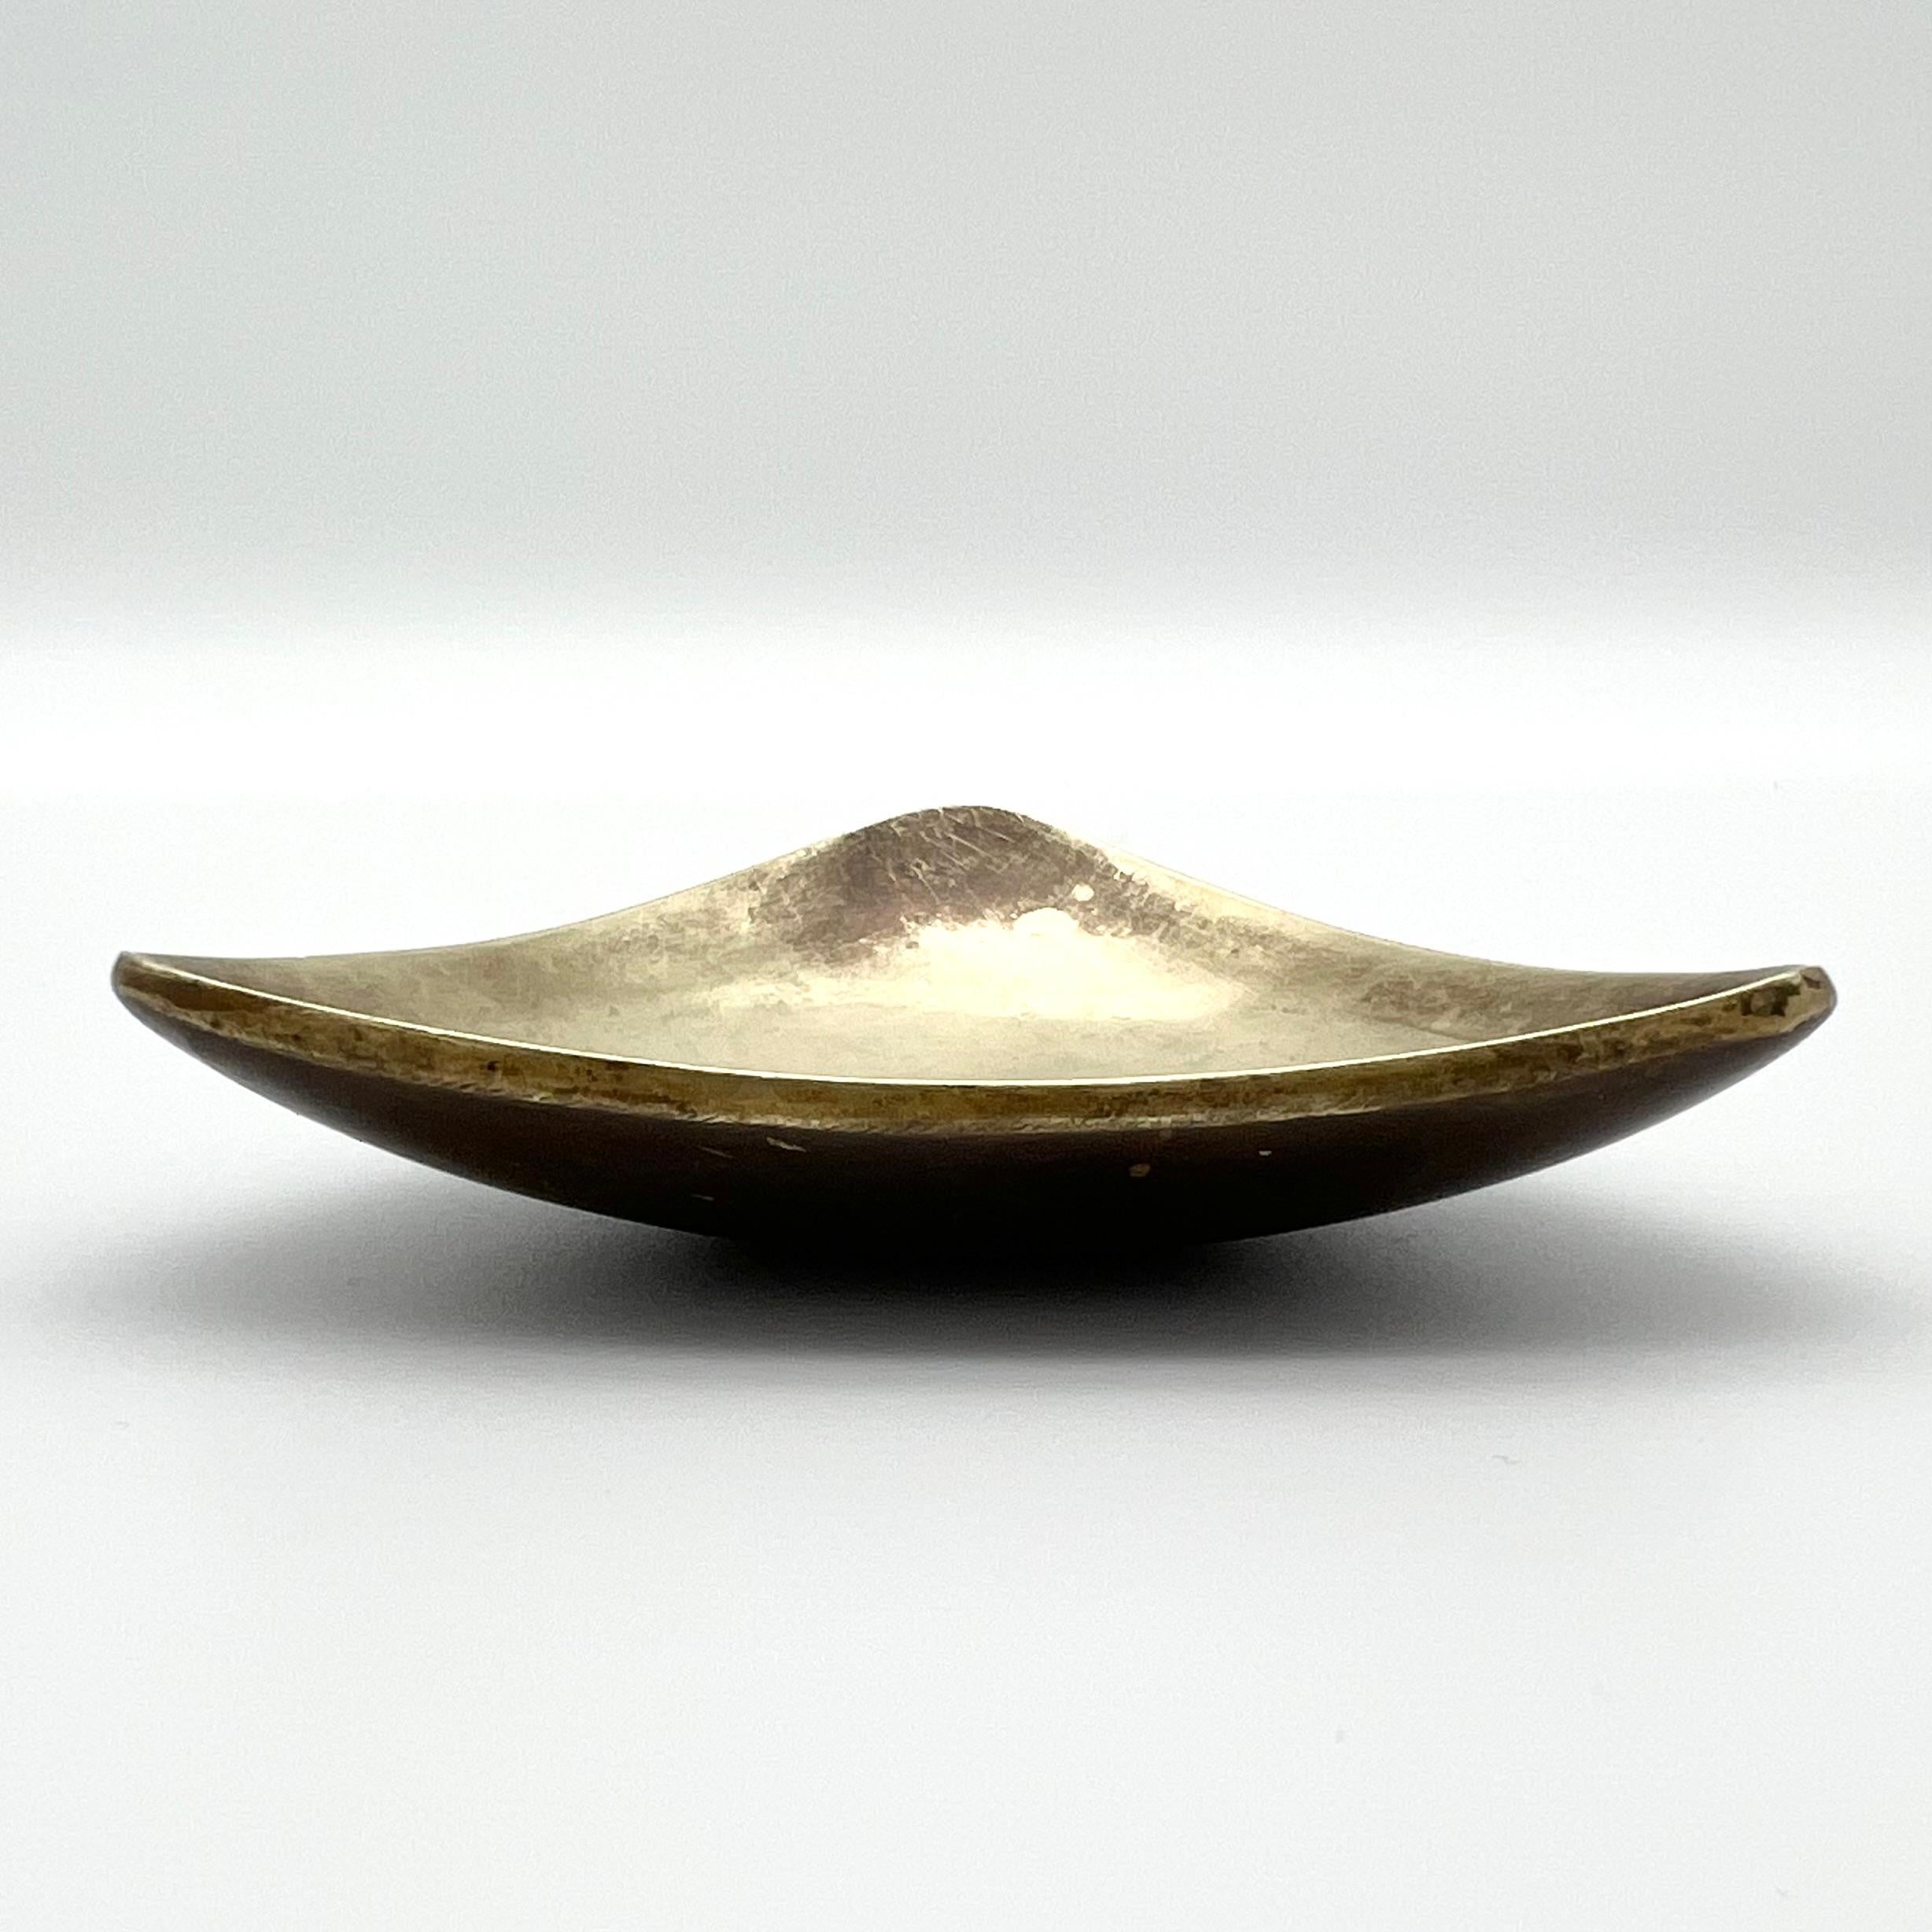 Triangular Ashtray, made in the 1950s in Vienna. 
Made of Solid brass with a great patina built up over time.

Side lengths: 9,5cm
Height: 2cm

The design drawing is also pictured in the cataloge: 